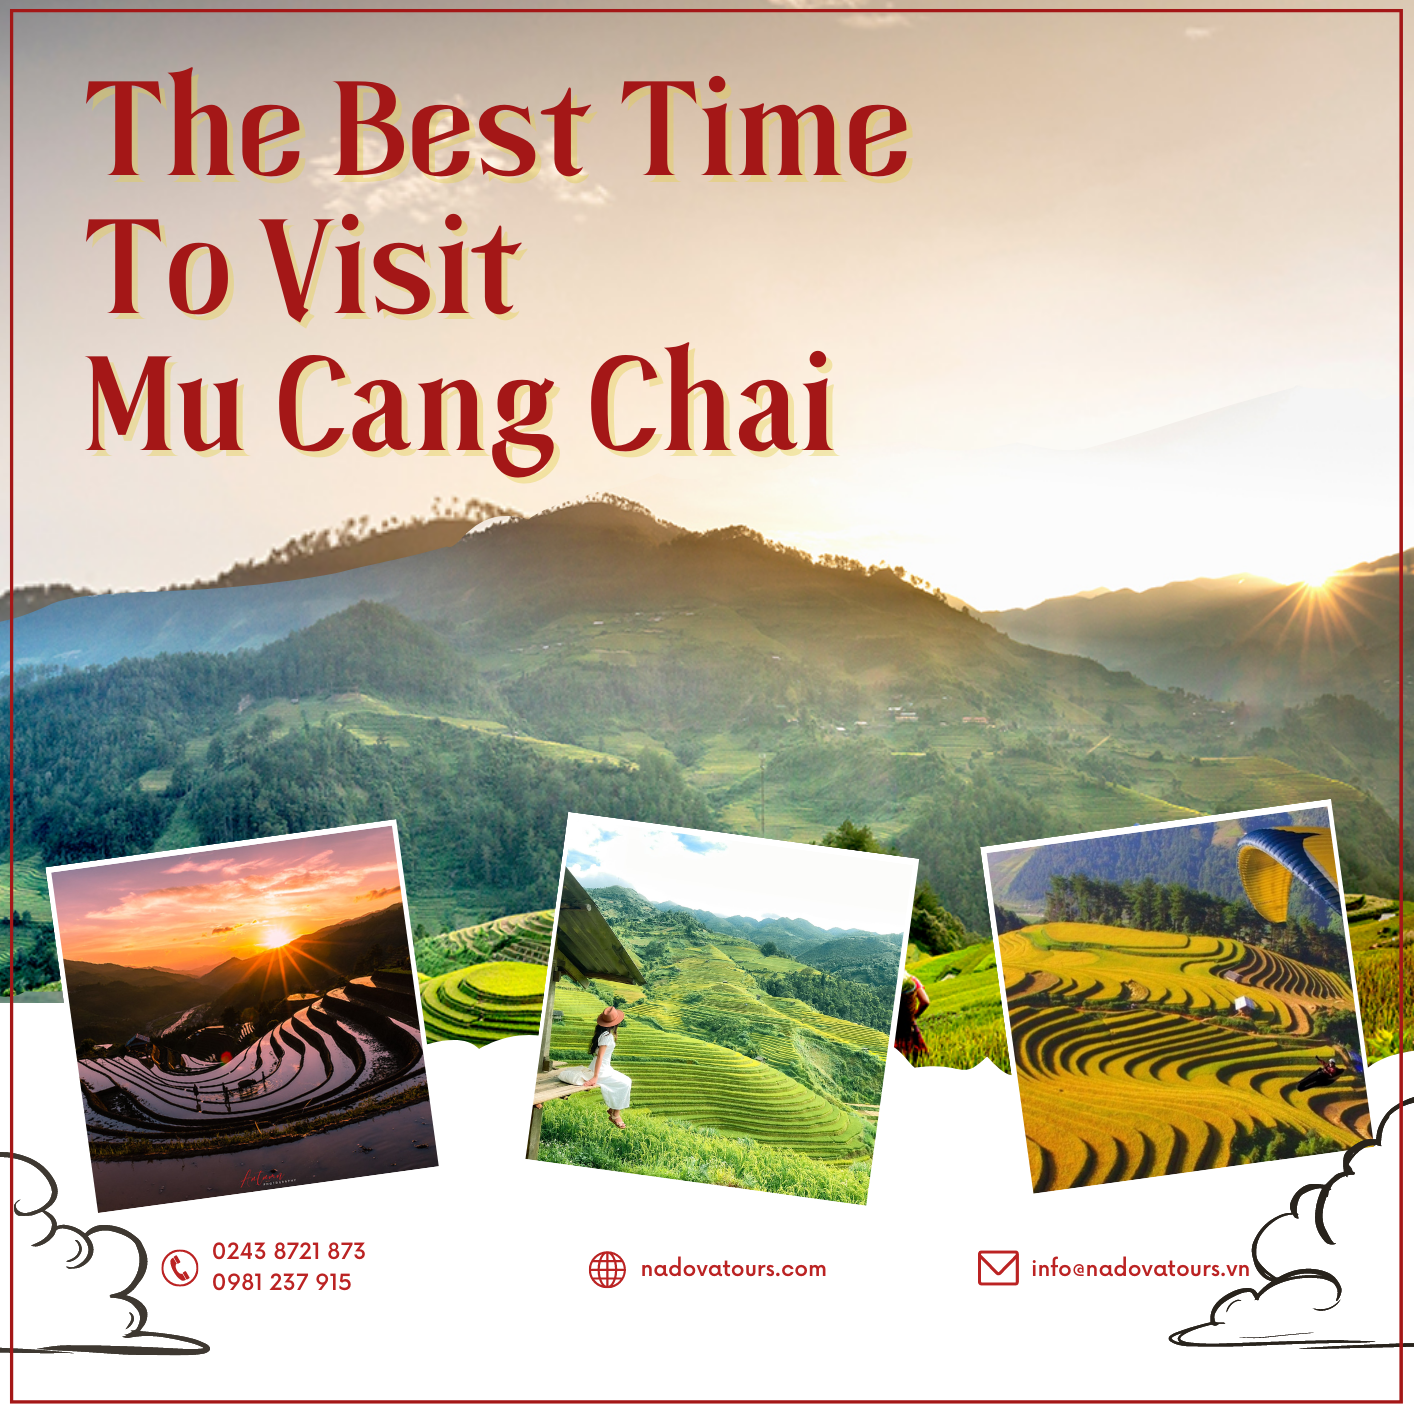 The Best Time To Visit Mu Cang Chai